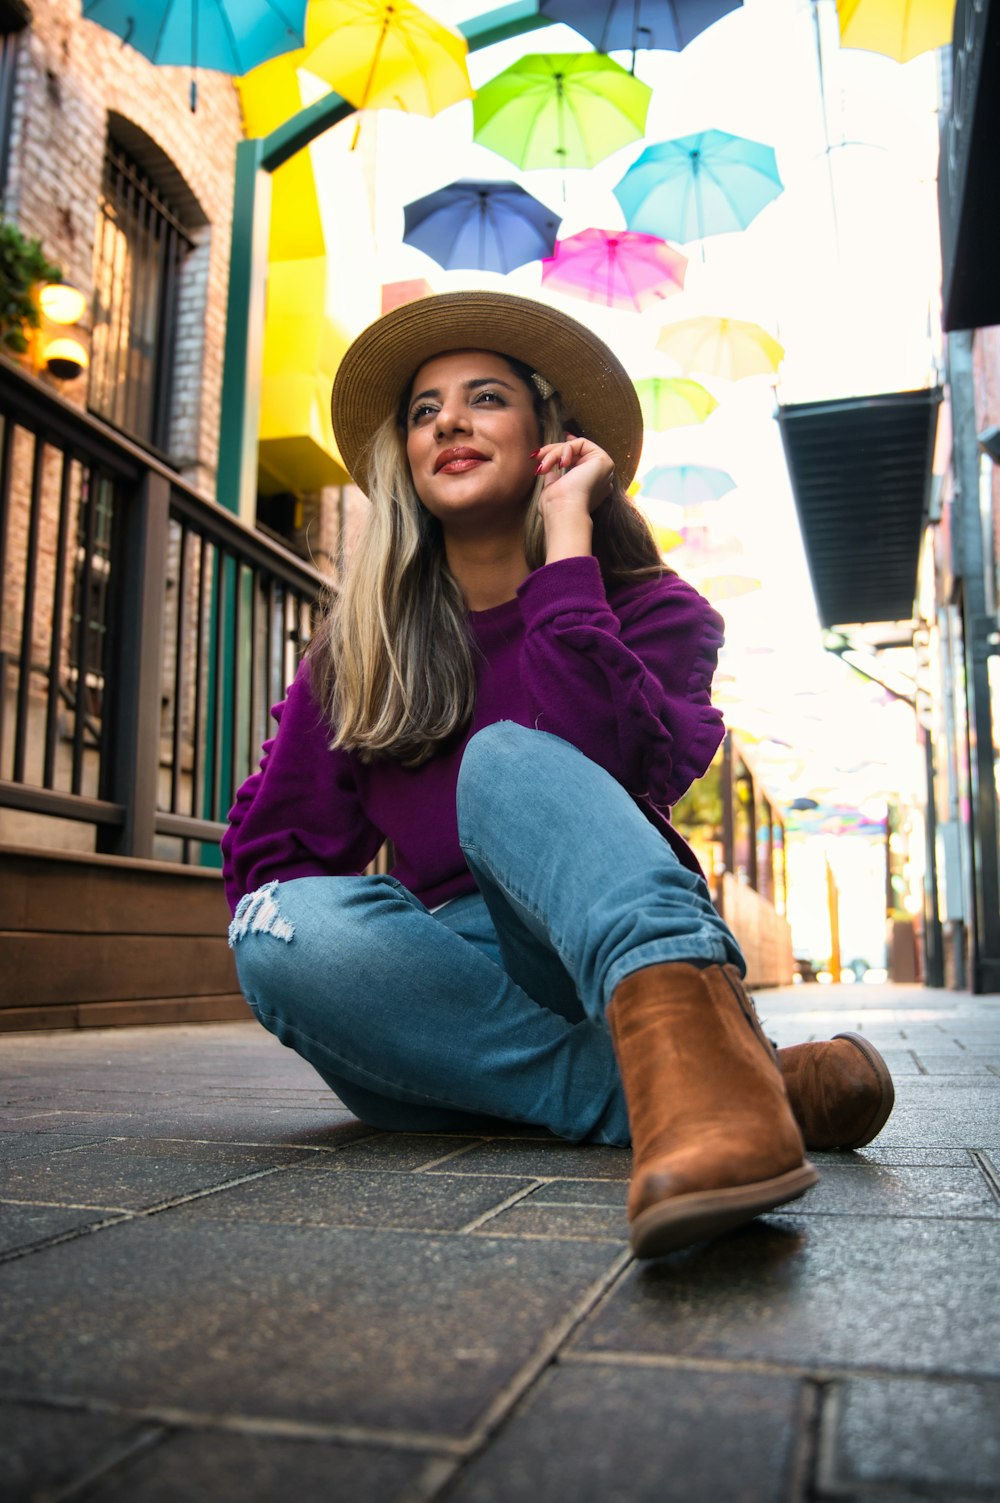 woman in purple jacket and blue denim jeans sitting on sidewalk during daytime